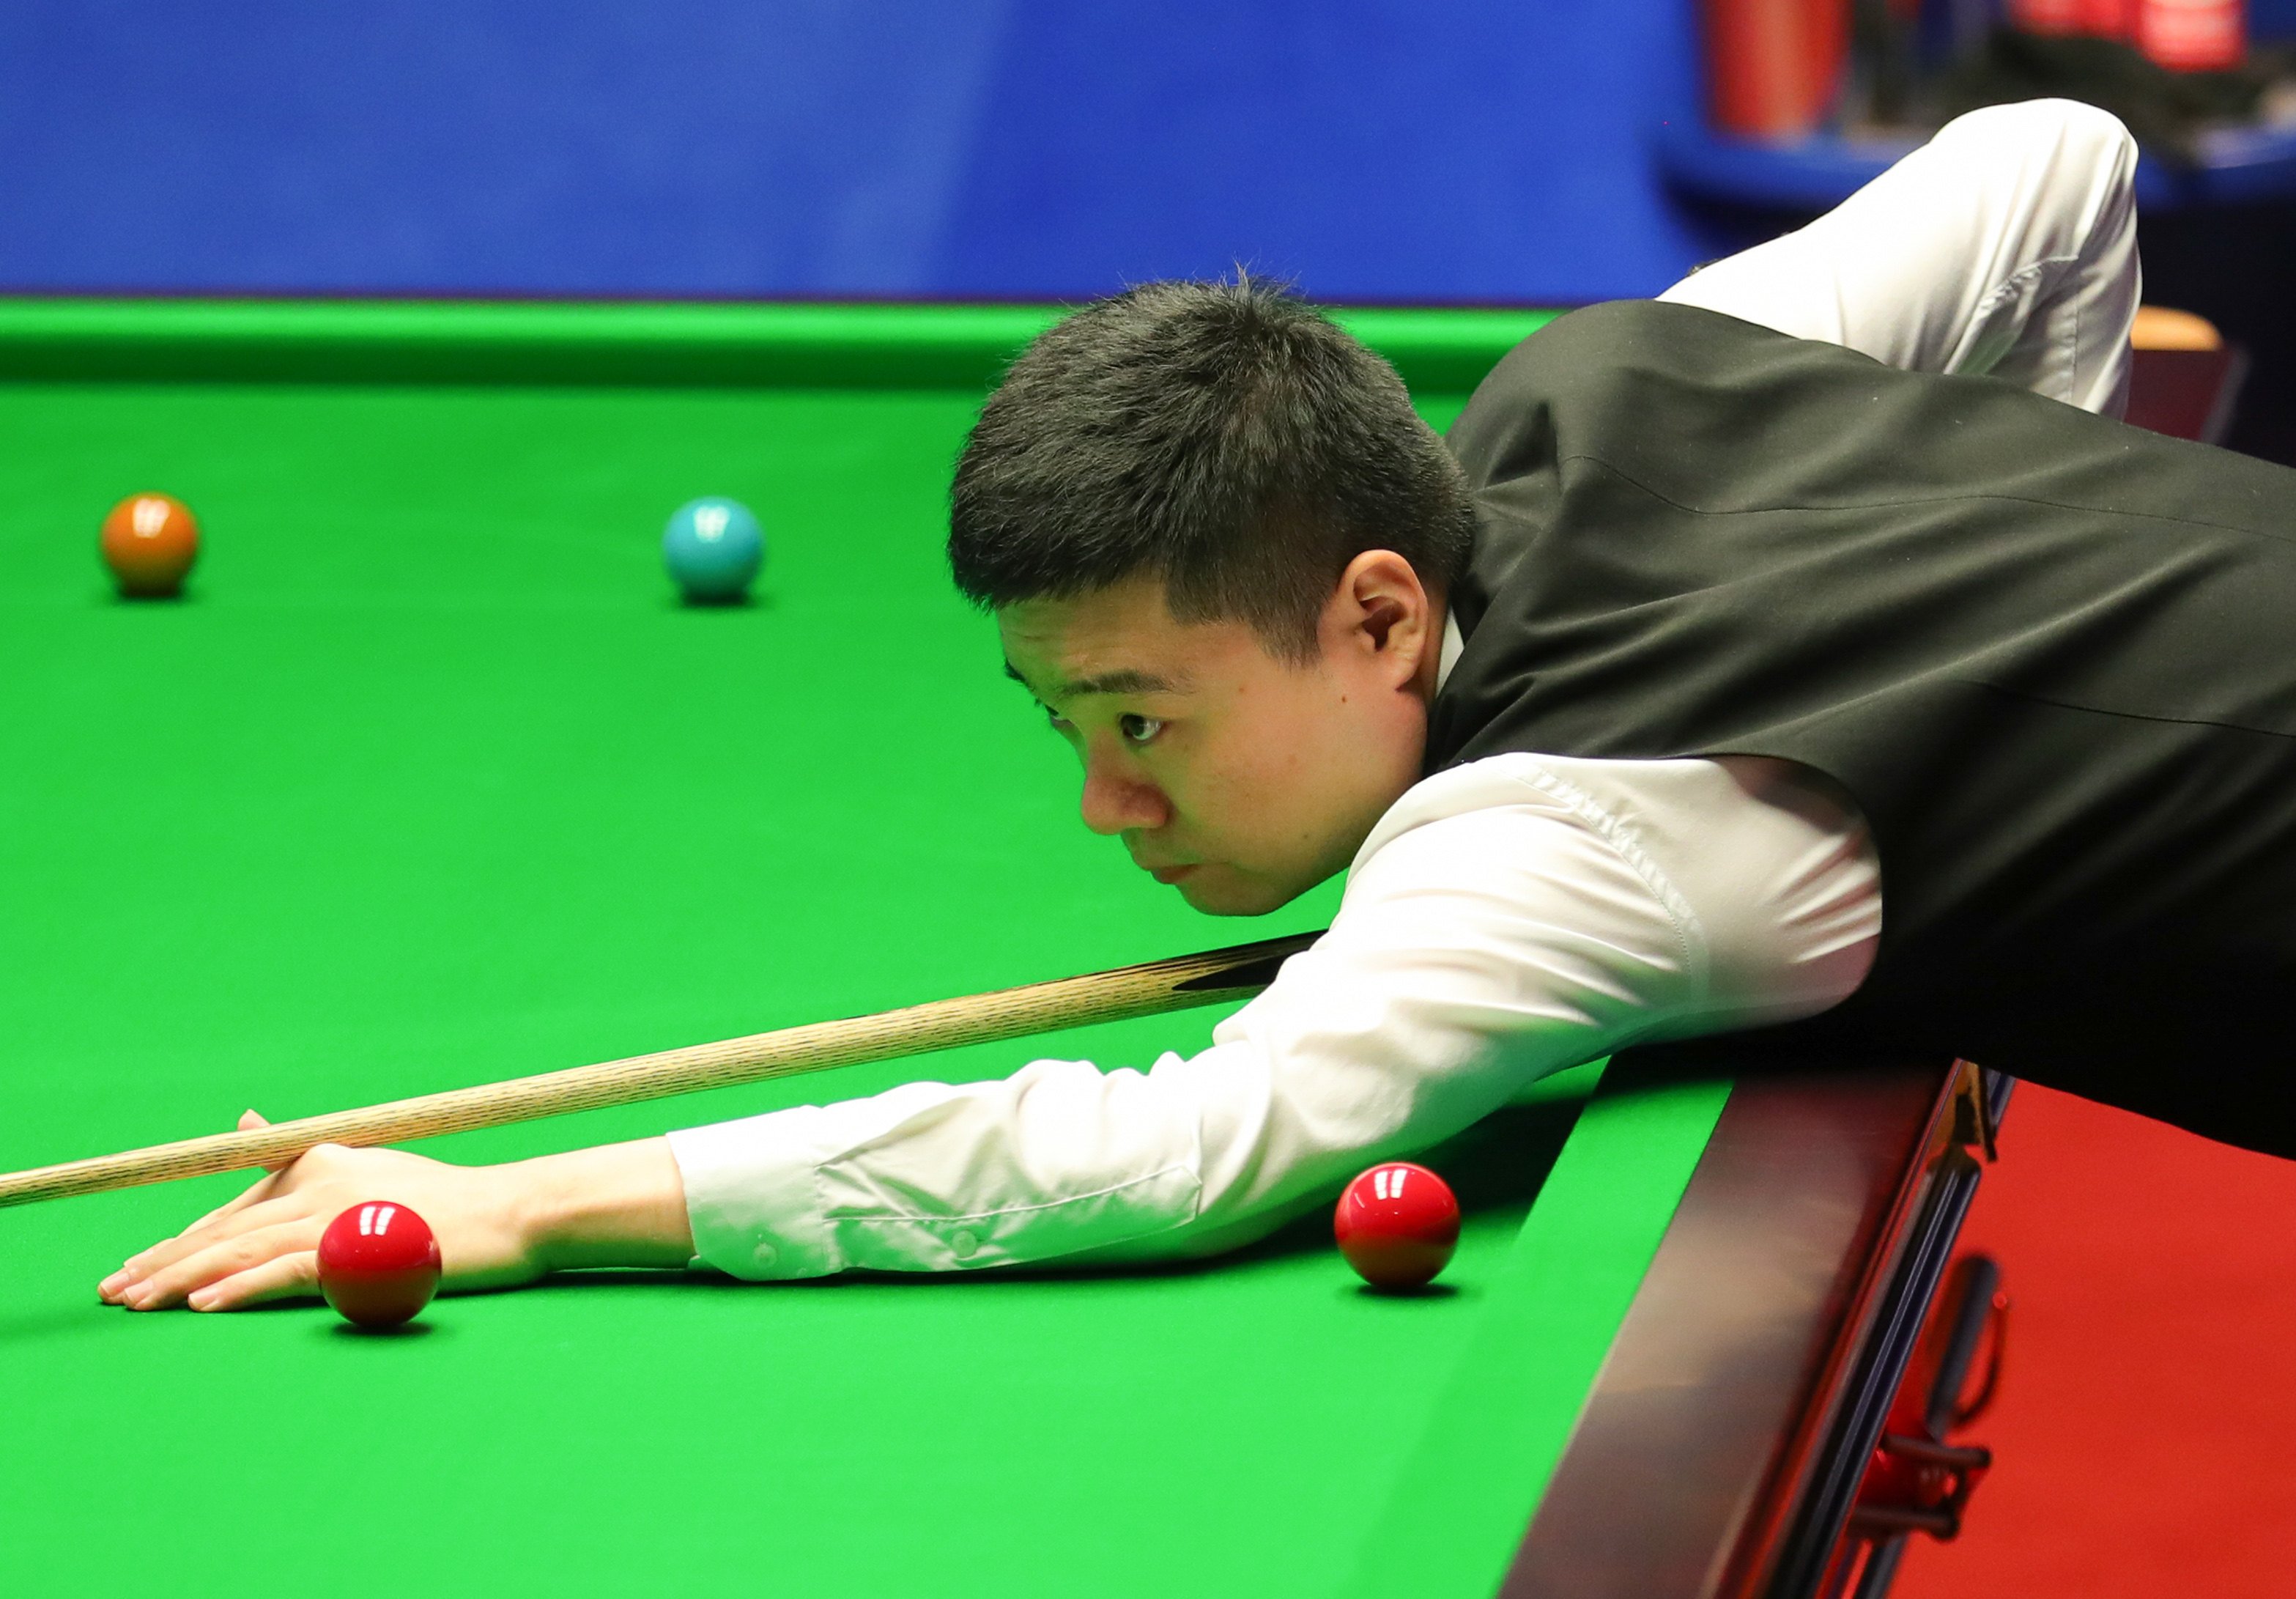 Ding Junhui will lead the Chinese contingent at the World Snooker Championship, which begins this weekend in Sheffield. Photo: Xinhua